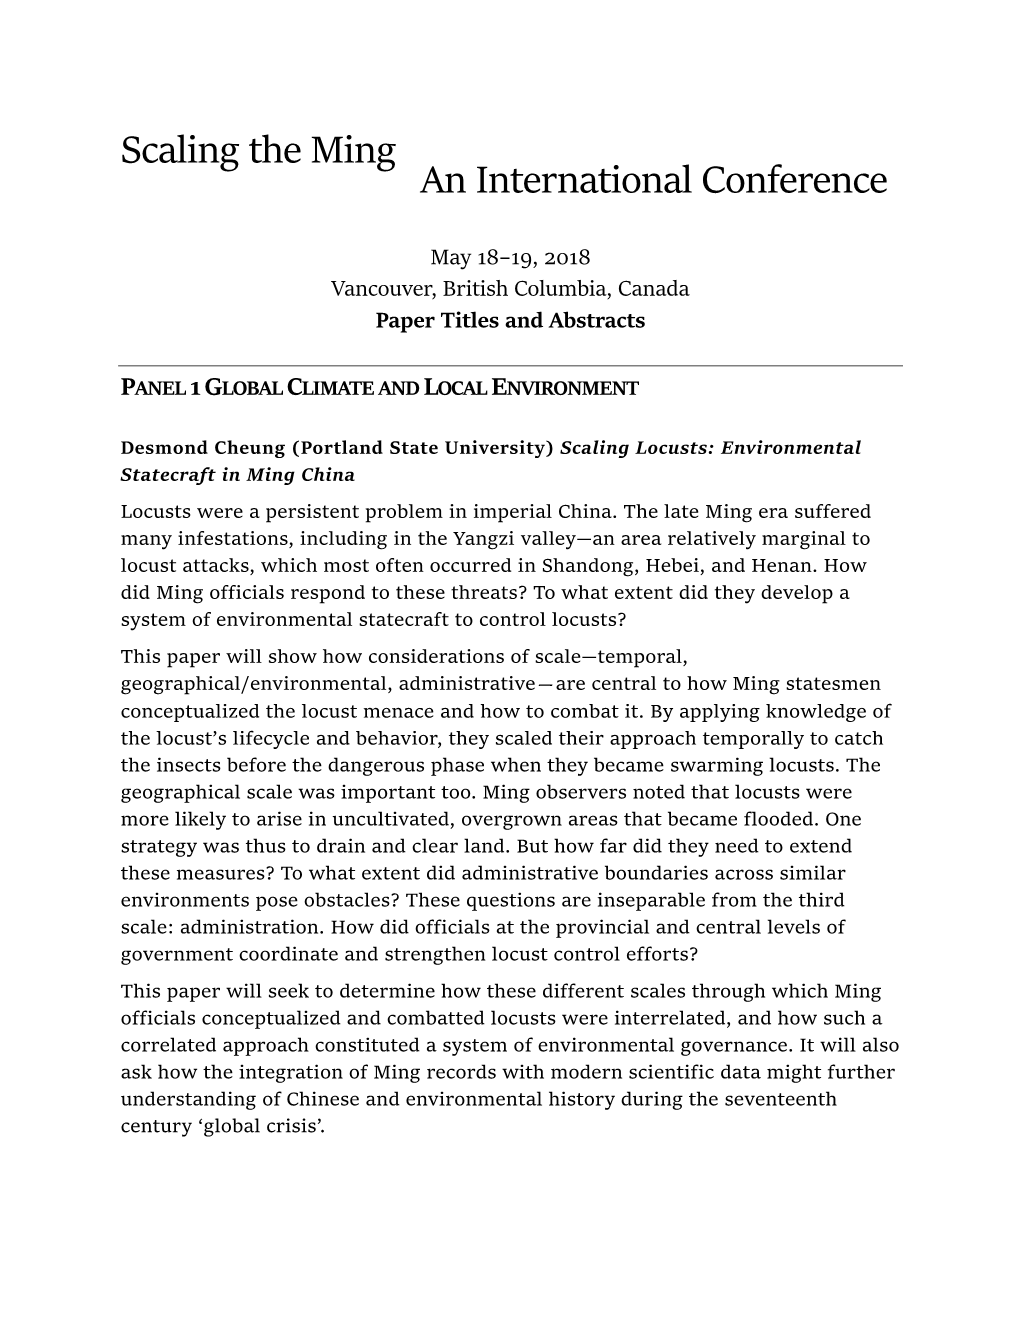 Scaling the Ming an International Conference